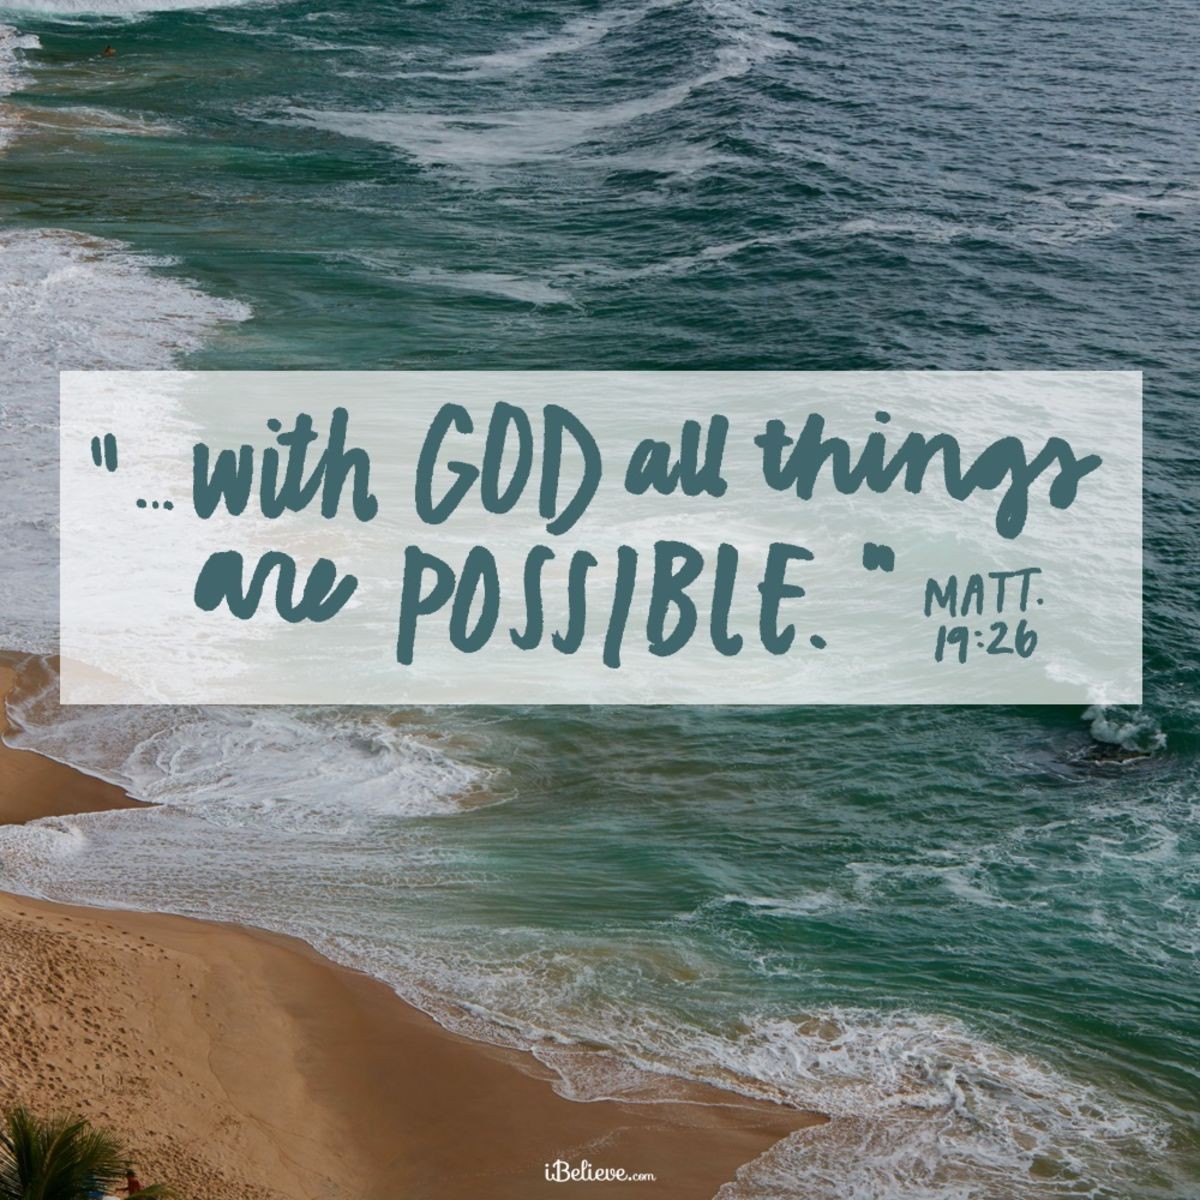 Your Daily Verse - Matthew 19:26